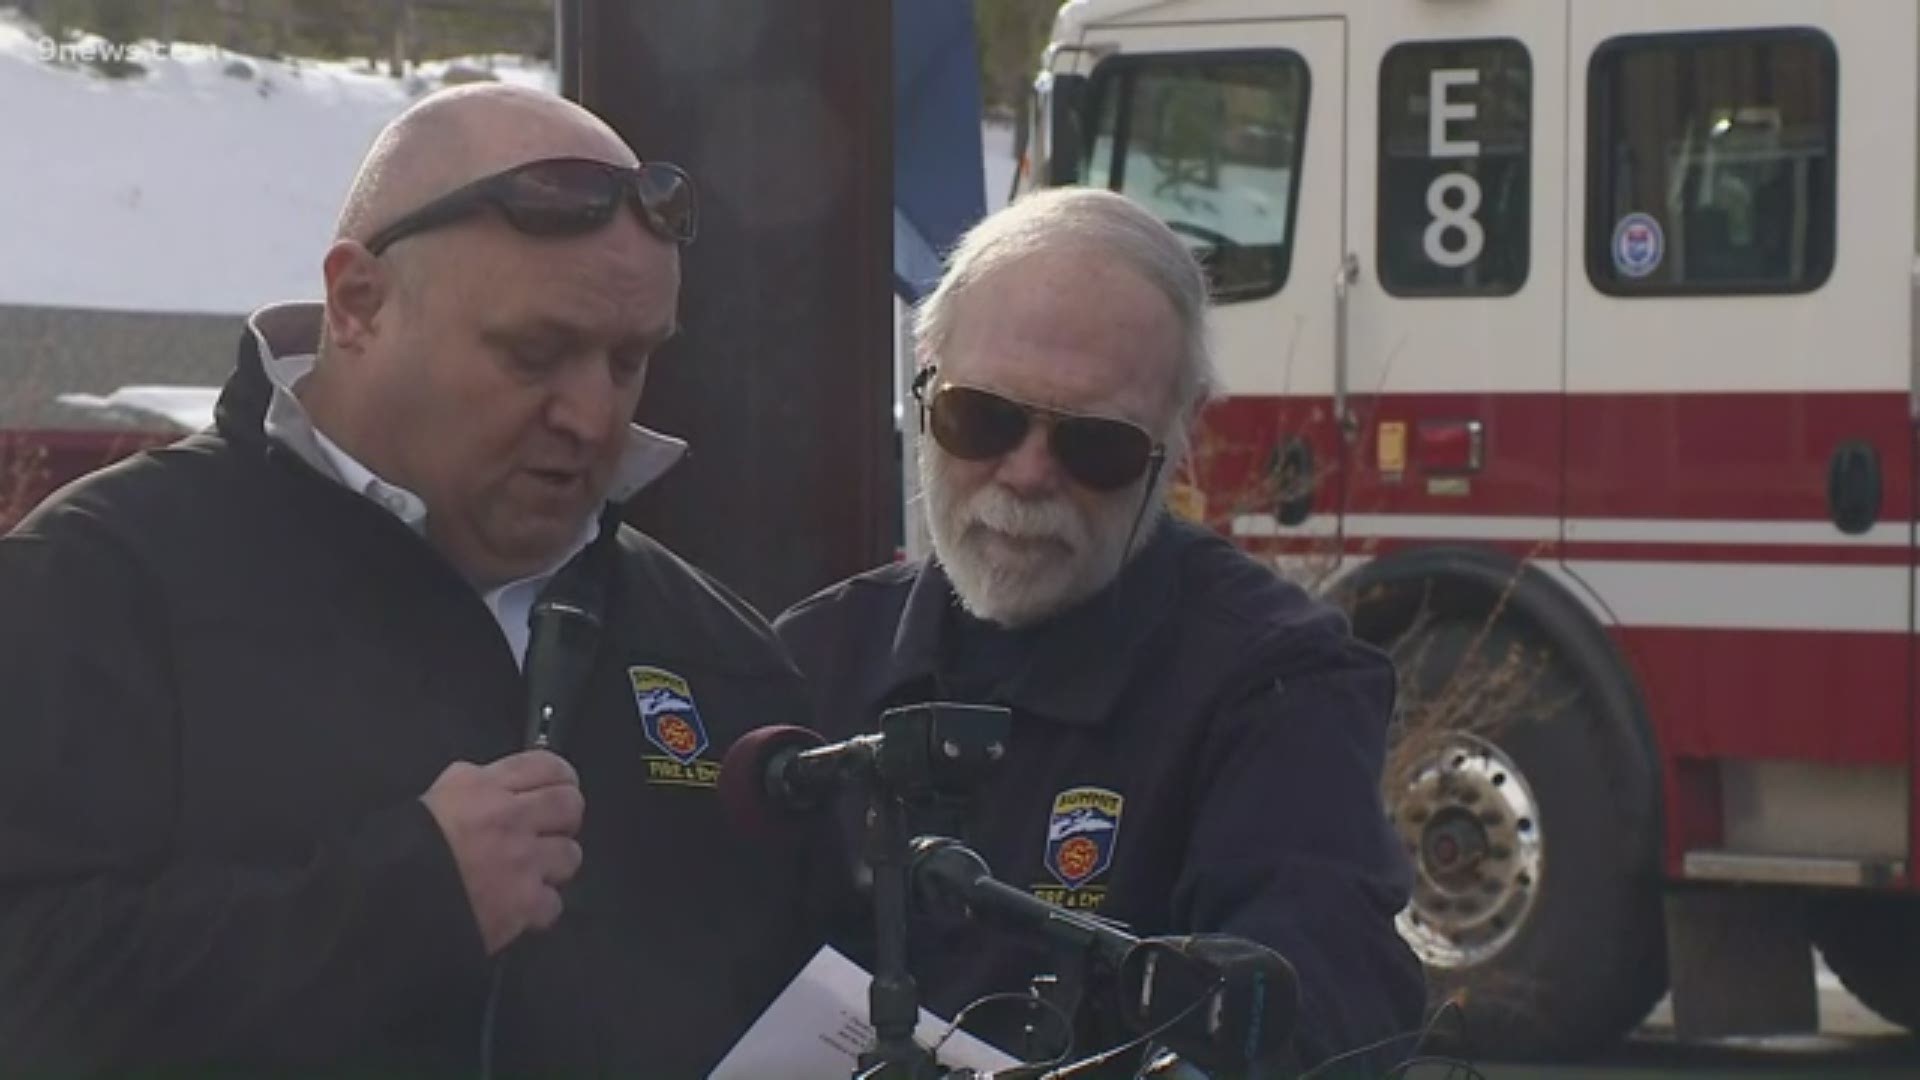 Summit Fire and EMS speak on the death of a 20-year veteran firefighter who died after falling from a building while battling a fire Saturday.